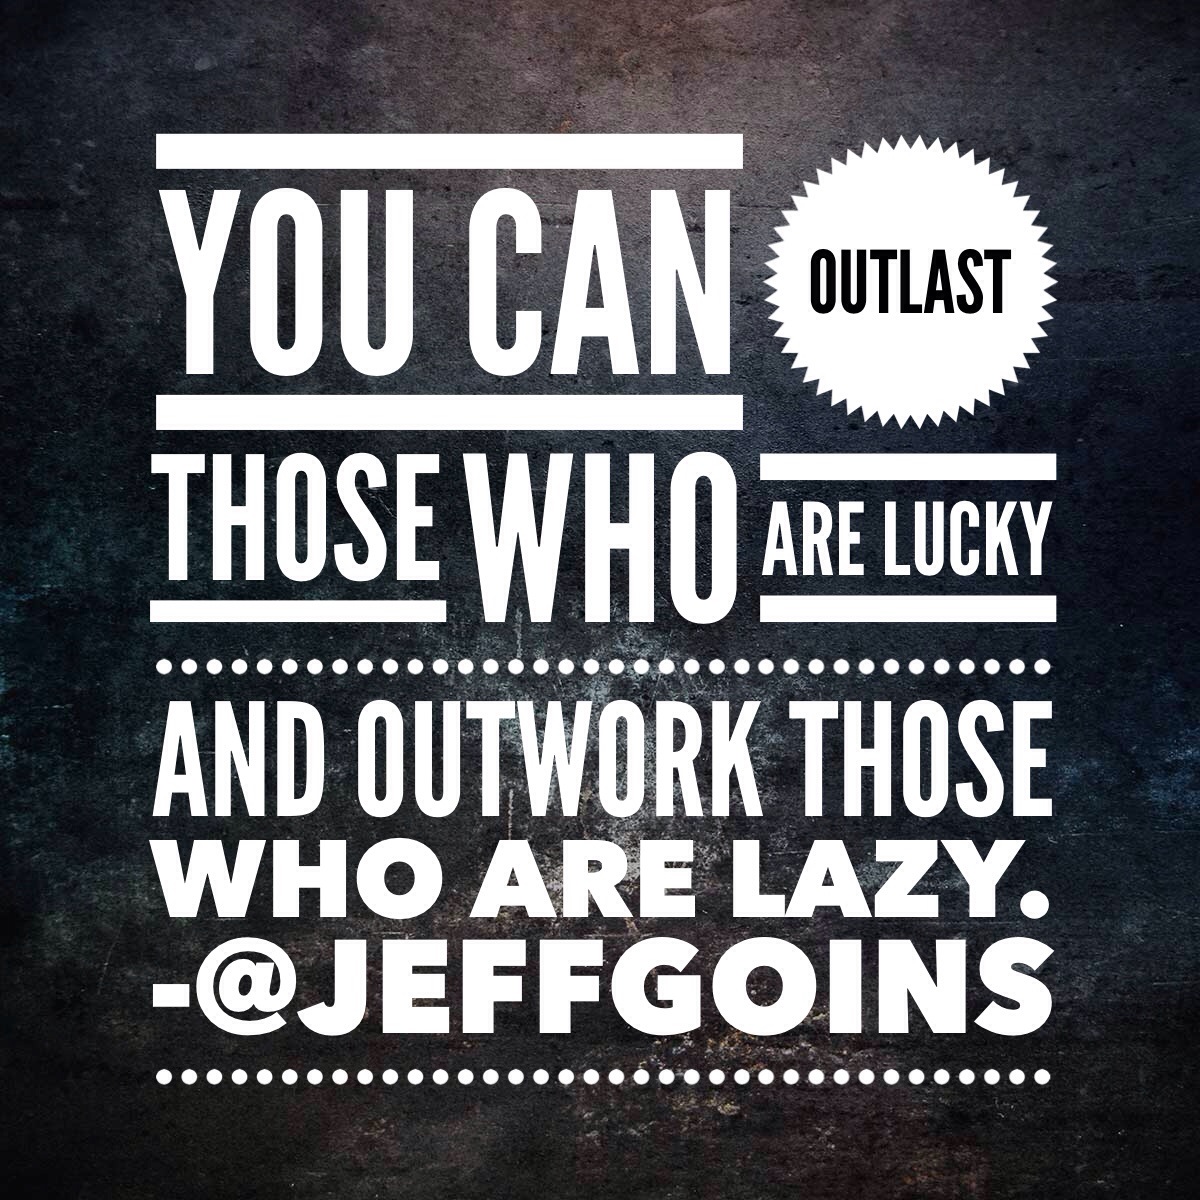 "You can outlast those who are lucky and outwork those who are lazy."